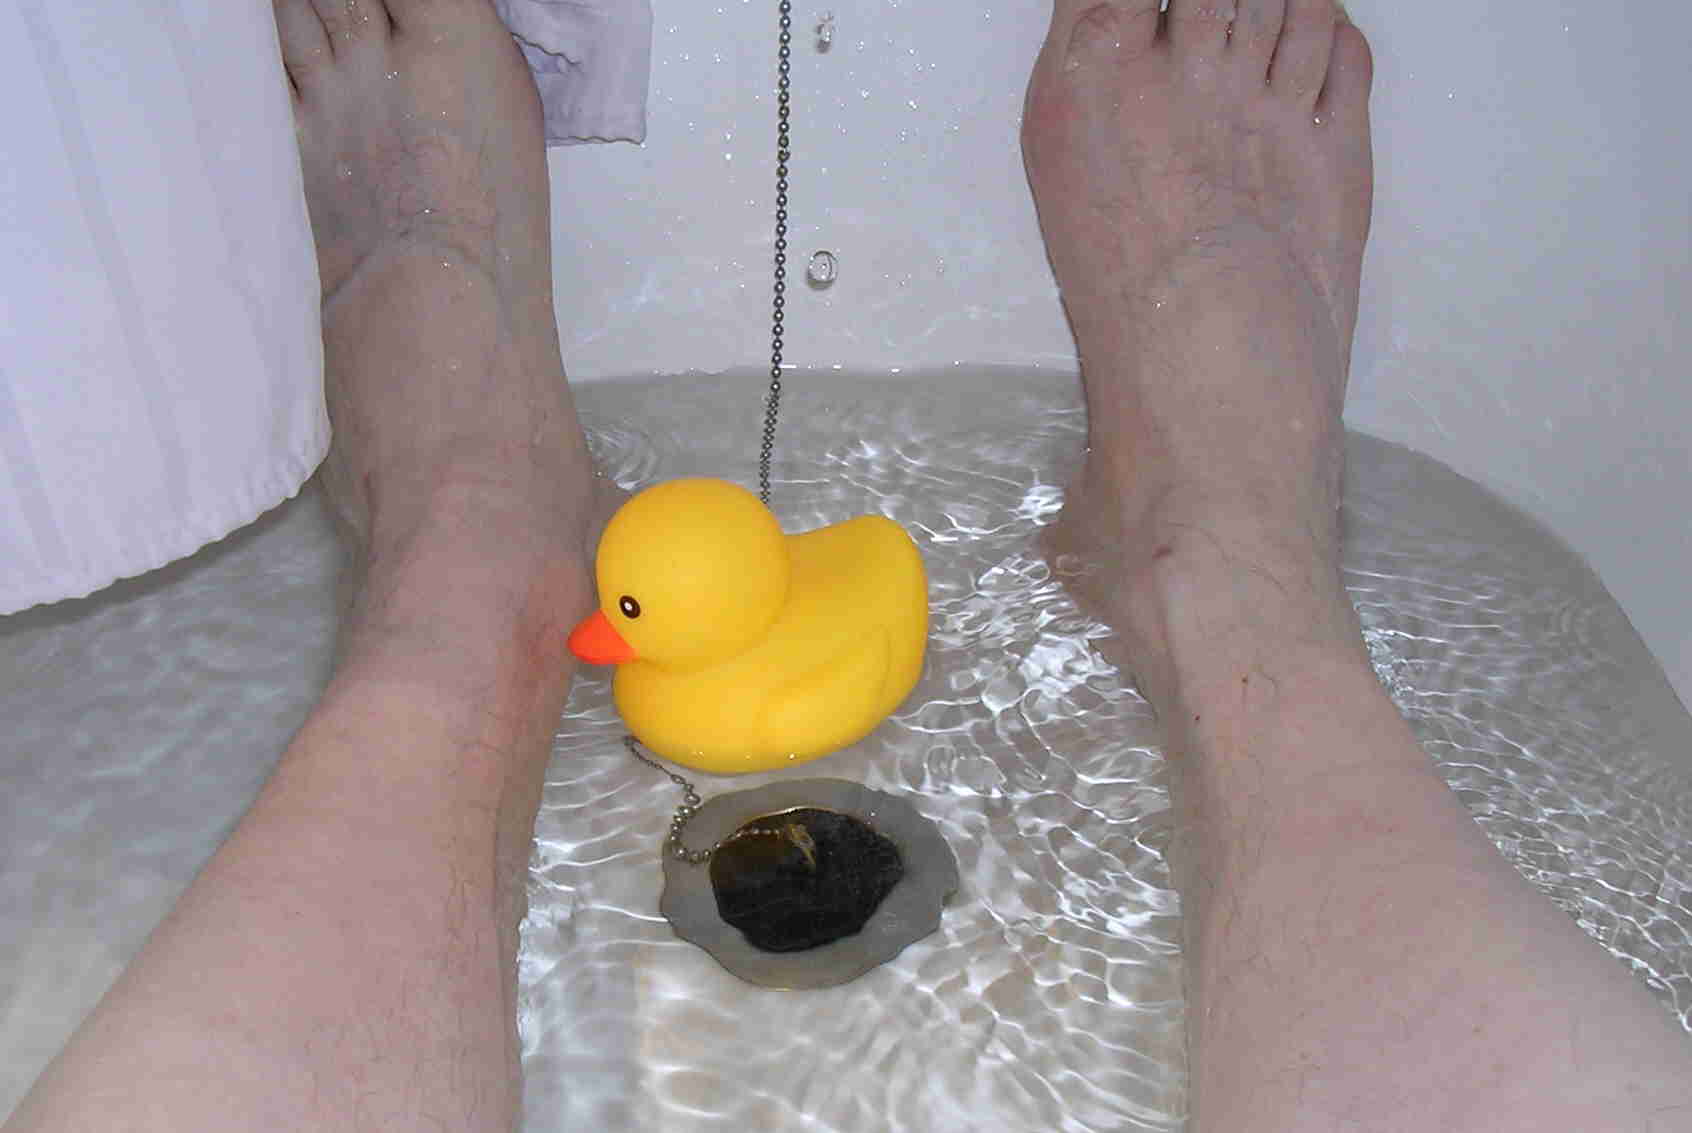 Bath with water, a pair of feet and a floating rubber duck